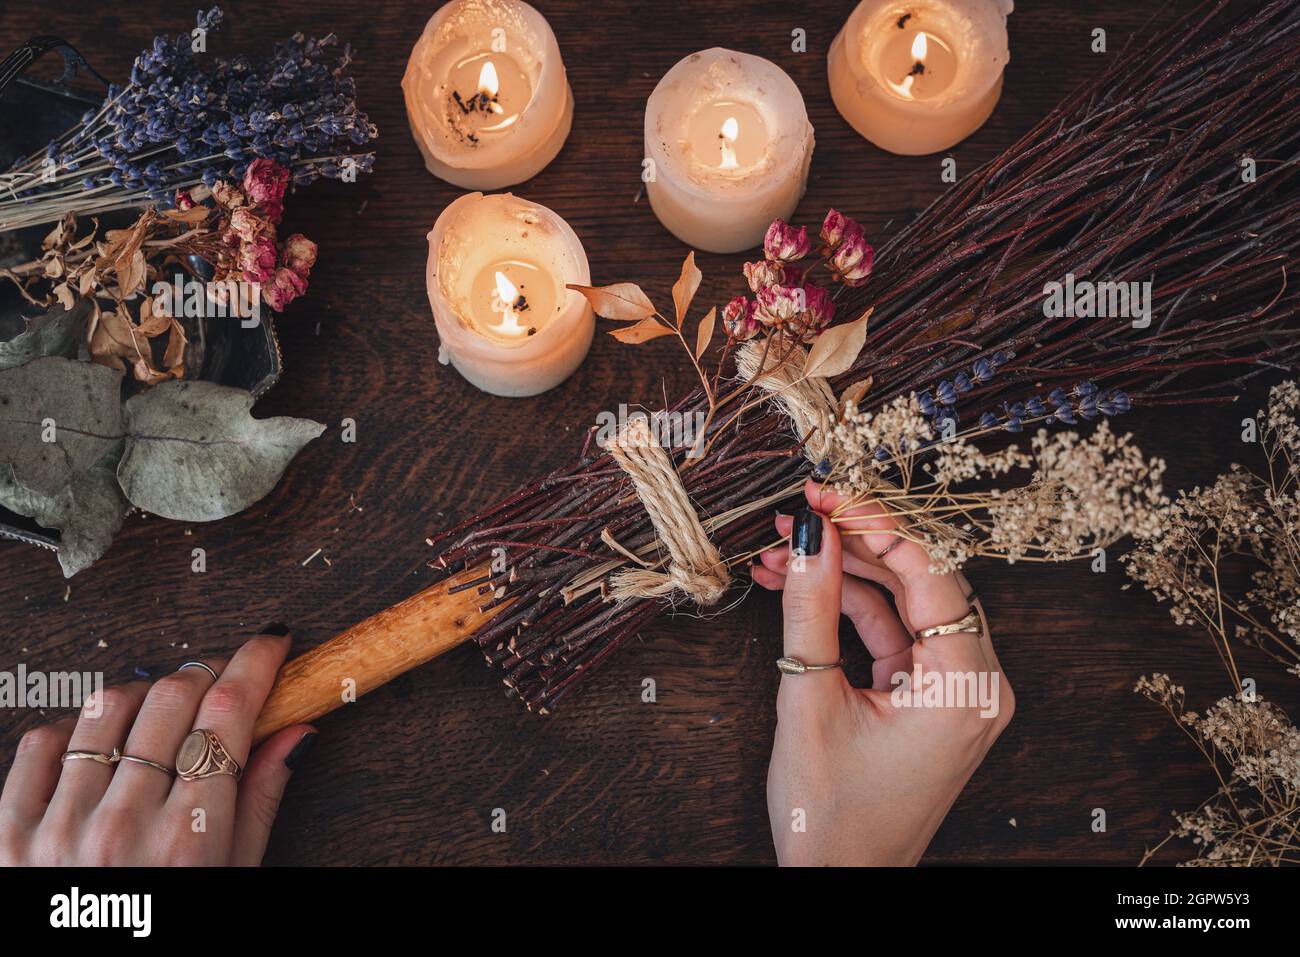 Wiccan witch decorating a DIY besom broom for Samhain celebration. Hand made broom on a dark wooden table Stock Photo